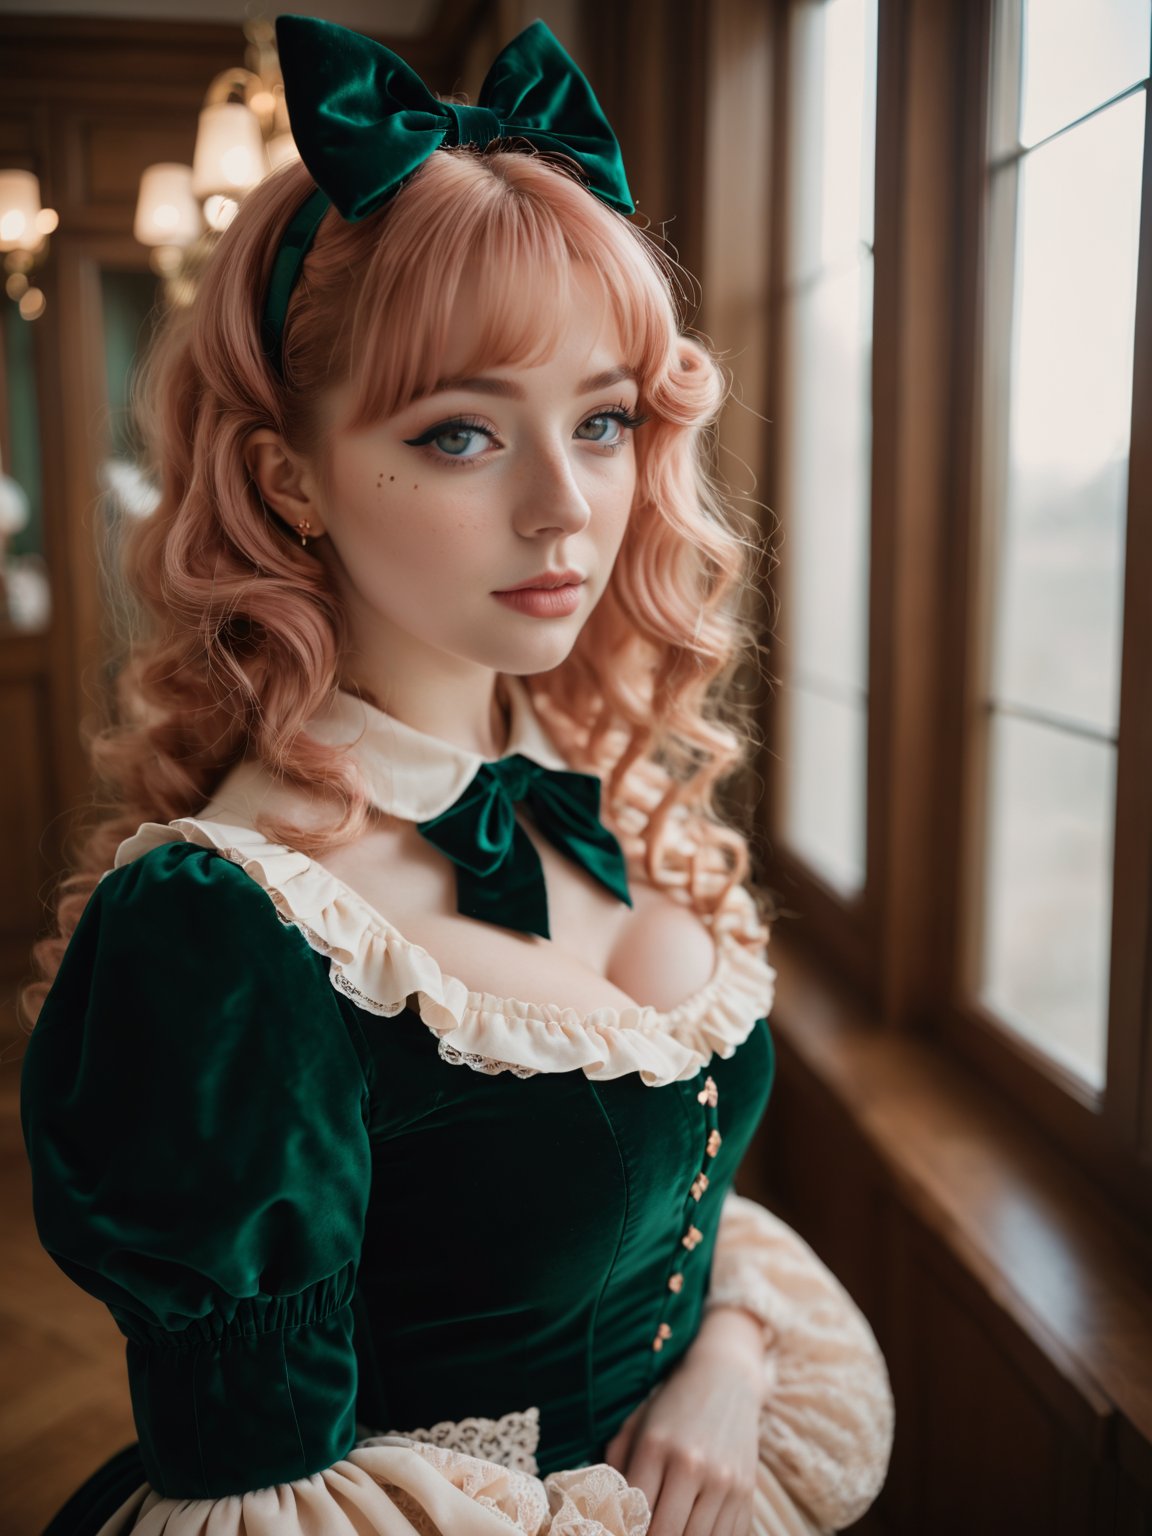 (Highest Quality, 4k, masterpiece, Amazing Details:1.1), Shallow Depth of Field, wide angle image of a 30yo captivating (adult:1.5) lolita girl (caucasian, rose gold hair in curls, gaze full of wonder, slender figure with natural contours, (skin nuances like a sprinkle of moles, faint freckles:1.12)) BREAK, costumed in an intricate dark emerald lolita outfit with velvet bows, in a poised stance, film grain effect, reminiscing of classic fujifilm, artisan photography, 40mm panoramic lens, f/1.7, ISO 100, halo lighting effect, skin tingling with anticipation, ultra realistic, influencer's choice on instagram, (photorealistic) (RAW Photo)